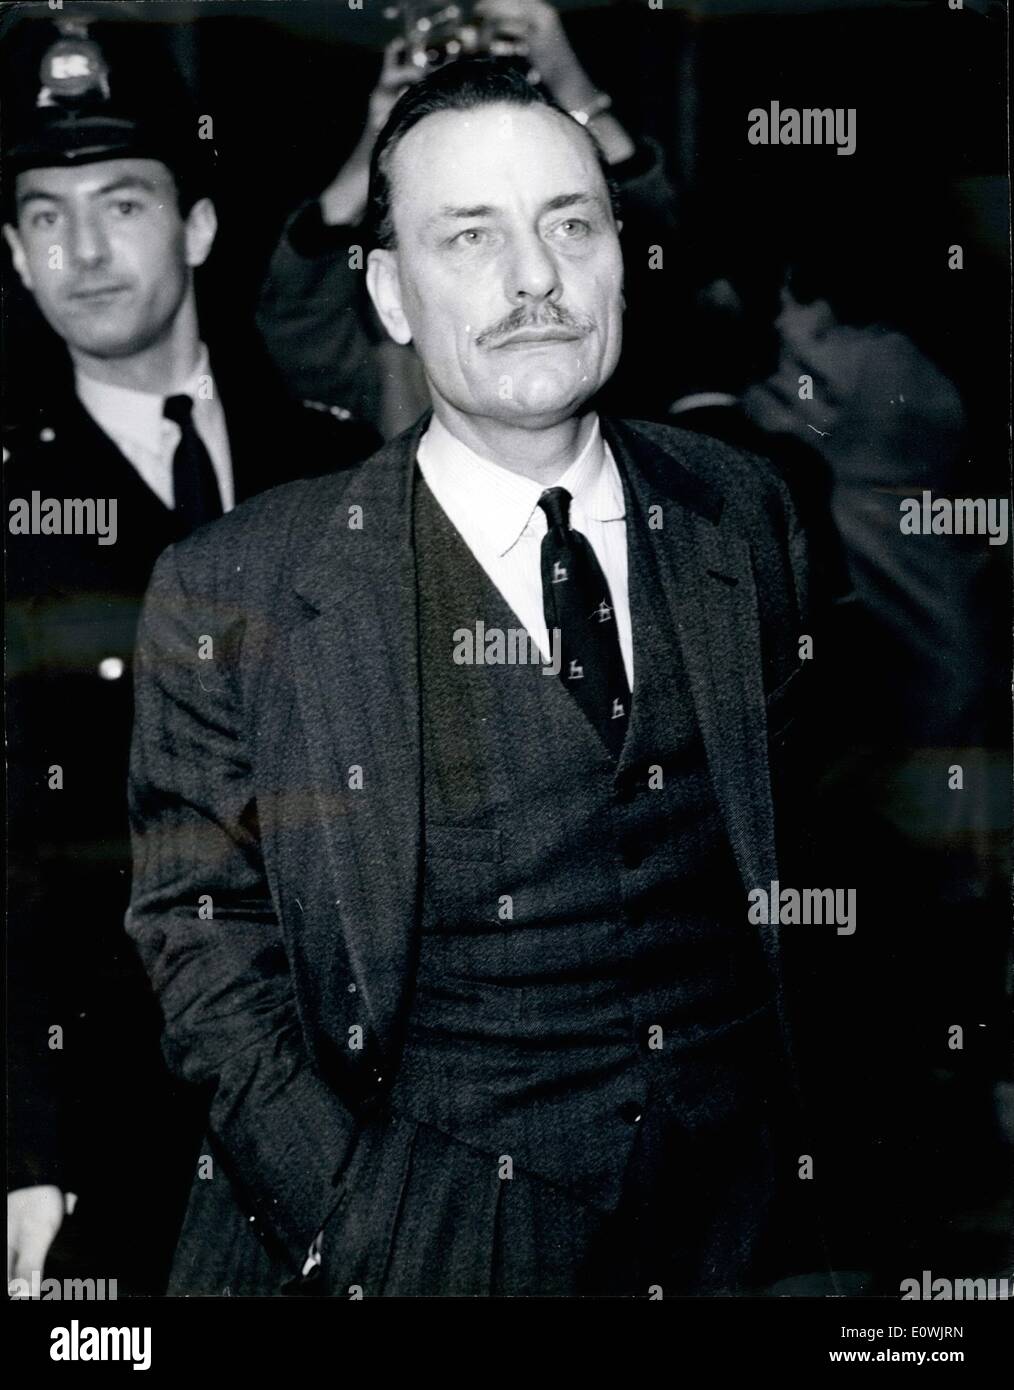 Jun. 06, 1963 - Cabinet Crisis over the  Affair. Enoch Powell - The Minister who may resign.: Prime Minister Harold Macmillan held a Cabinet meeting at Admiralty House again this morning the second in two days. It was the original intention for the Cabinet to return to routine business but such hopes were abandoned as it became increasingly apparent that MR. Enoch Power the Health Minister was on the brok of resignation. The bug question now or weather or not - Mr Powell would himself resign - or would be force the Prime Minister to resign Stock Photo